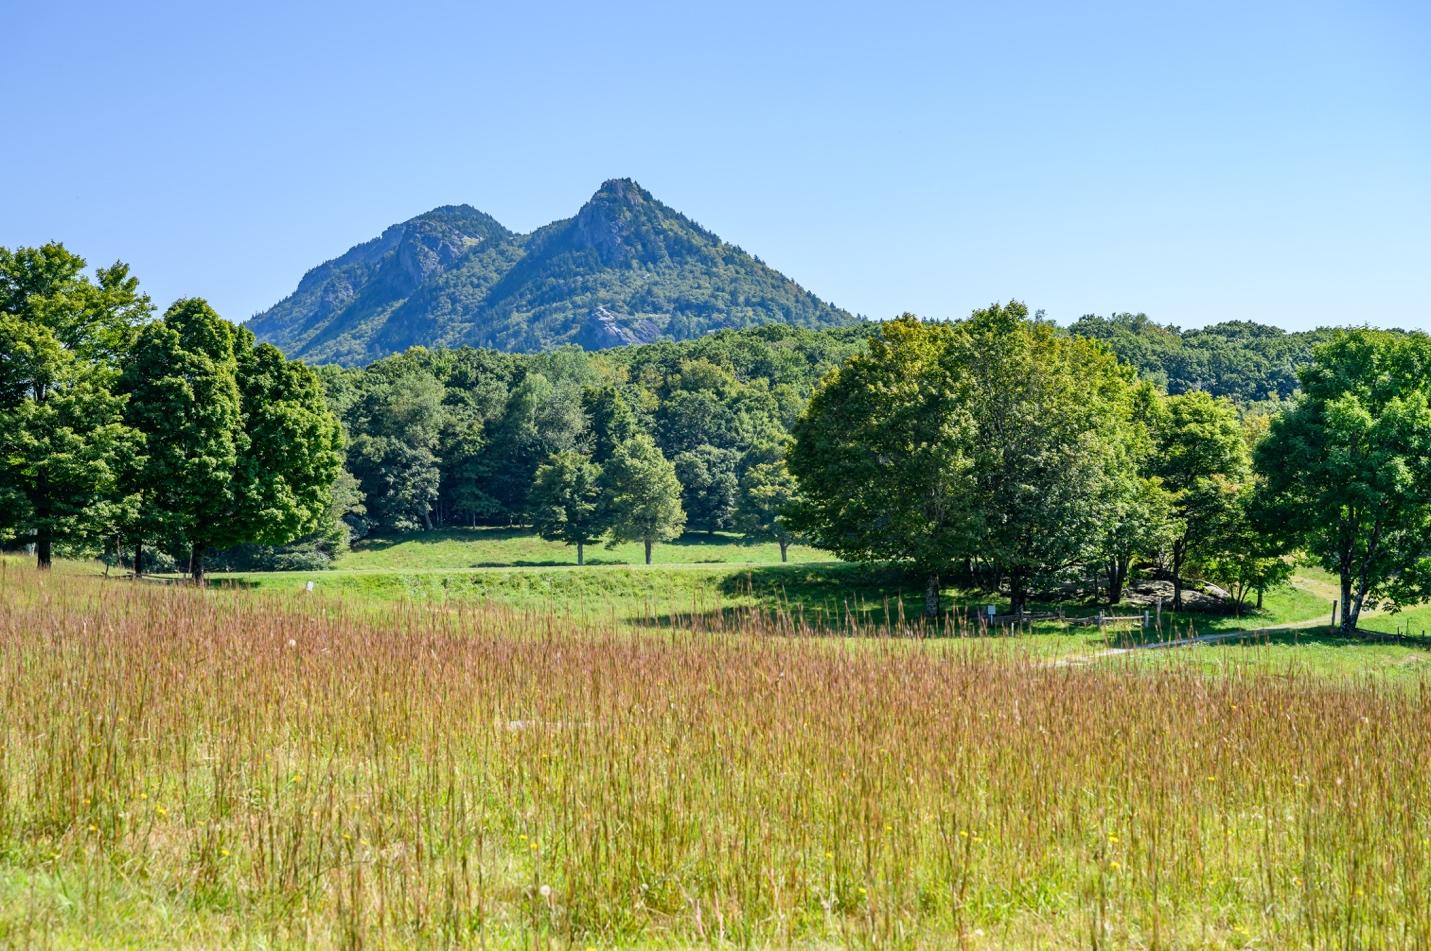 A field with trees and a mountain in the background

Description automatically generated with medium confidence